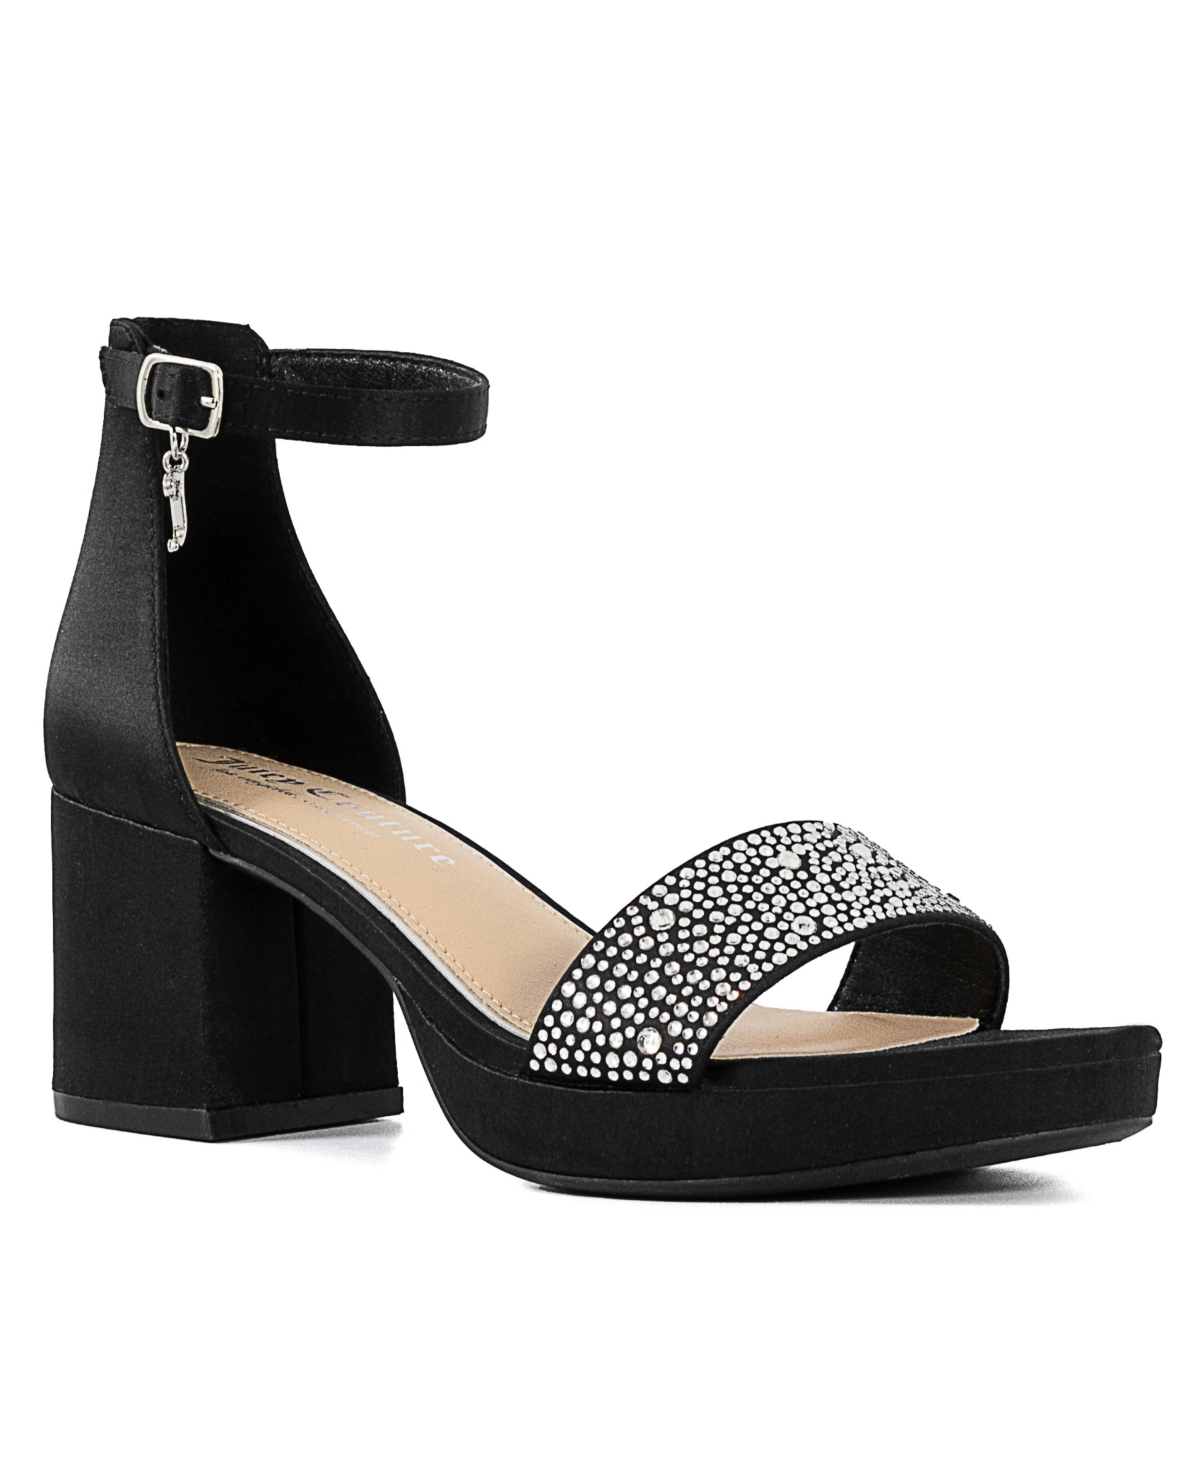 Juicy Couture Women's Nelly Dress Sandal In Black Satin